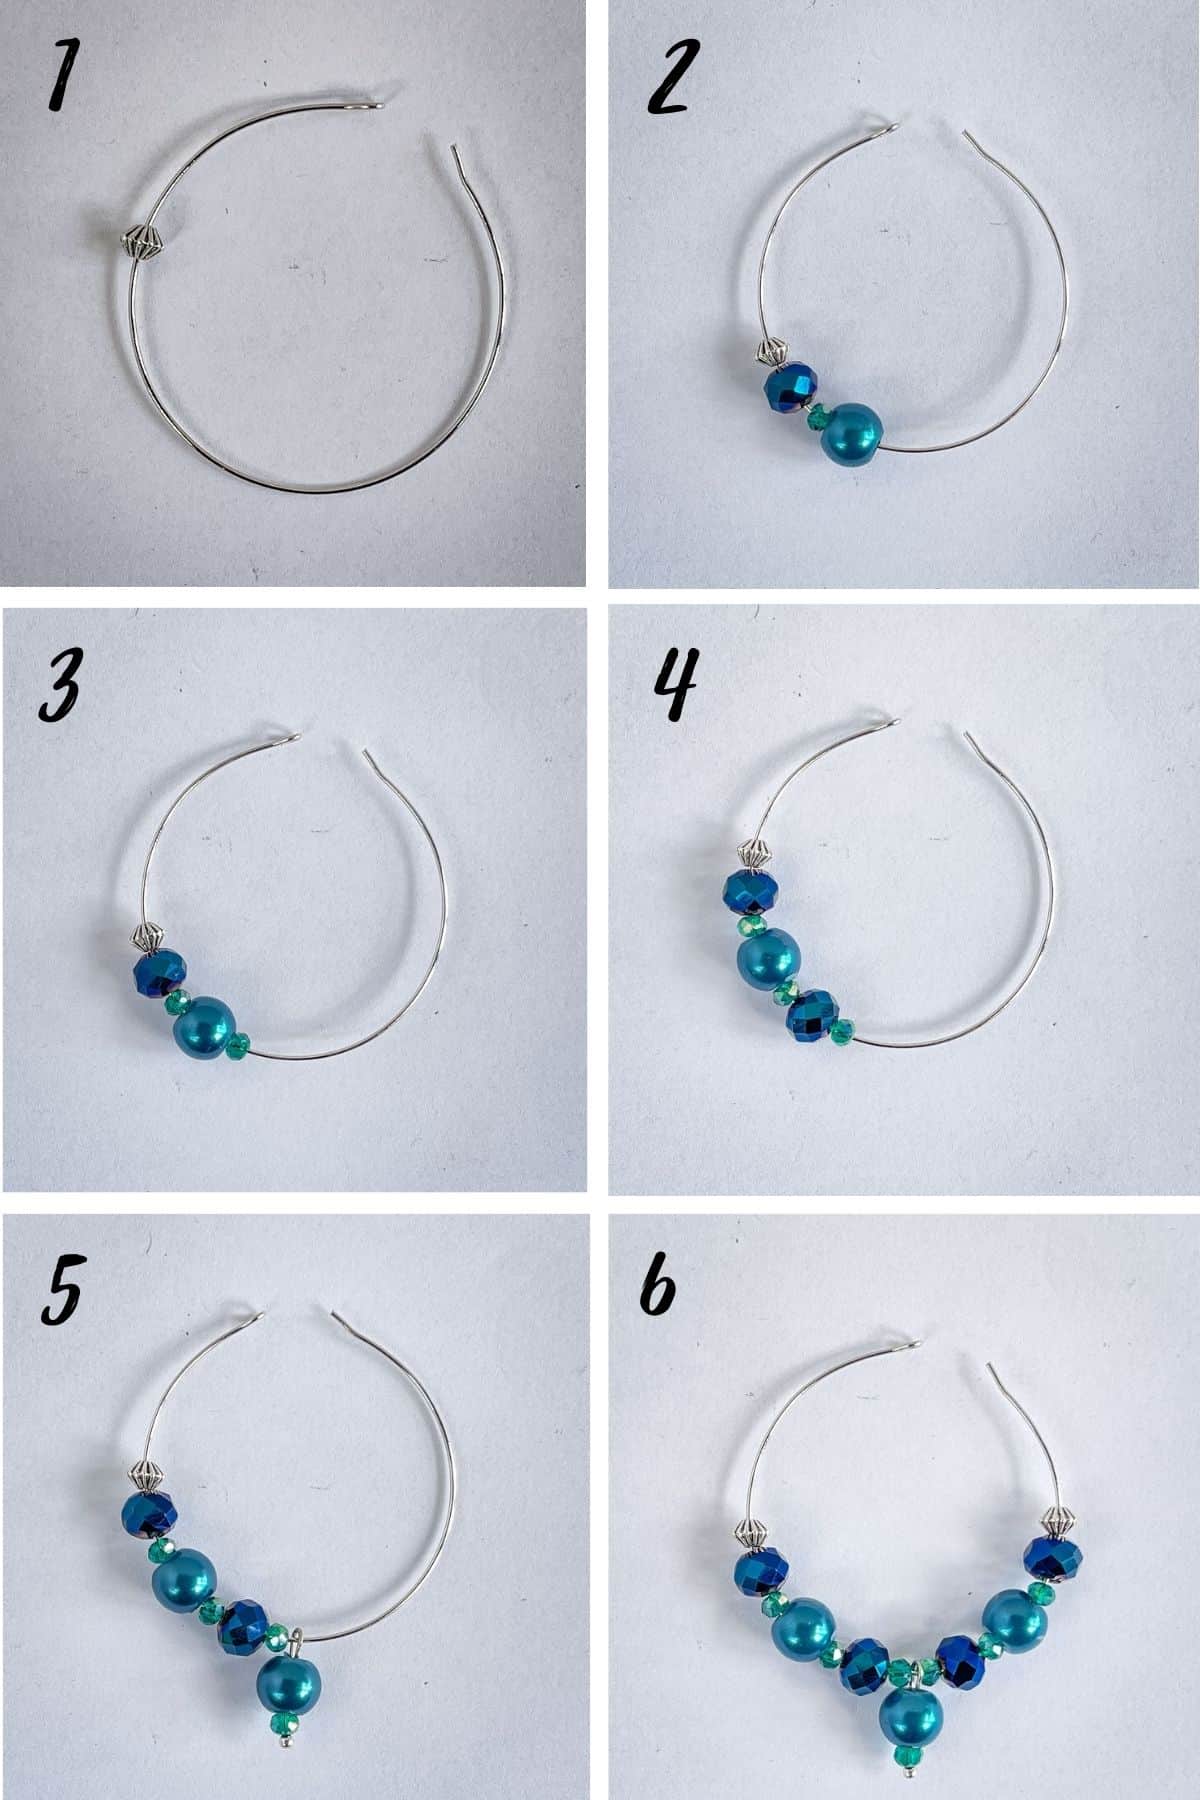 A poster of 6 images showing how to bead an earring hoop.